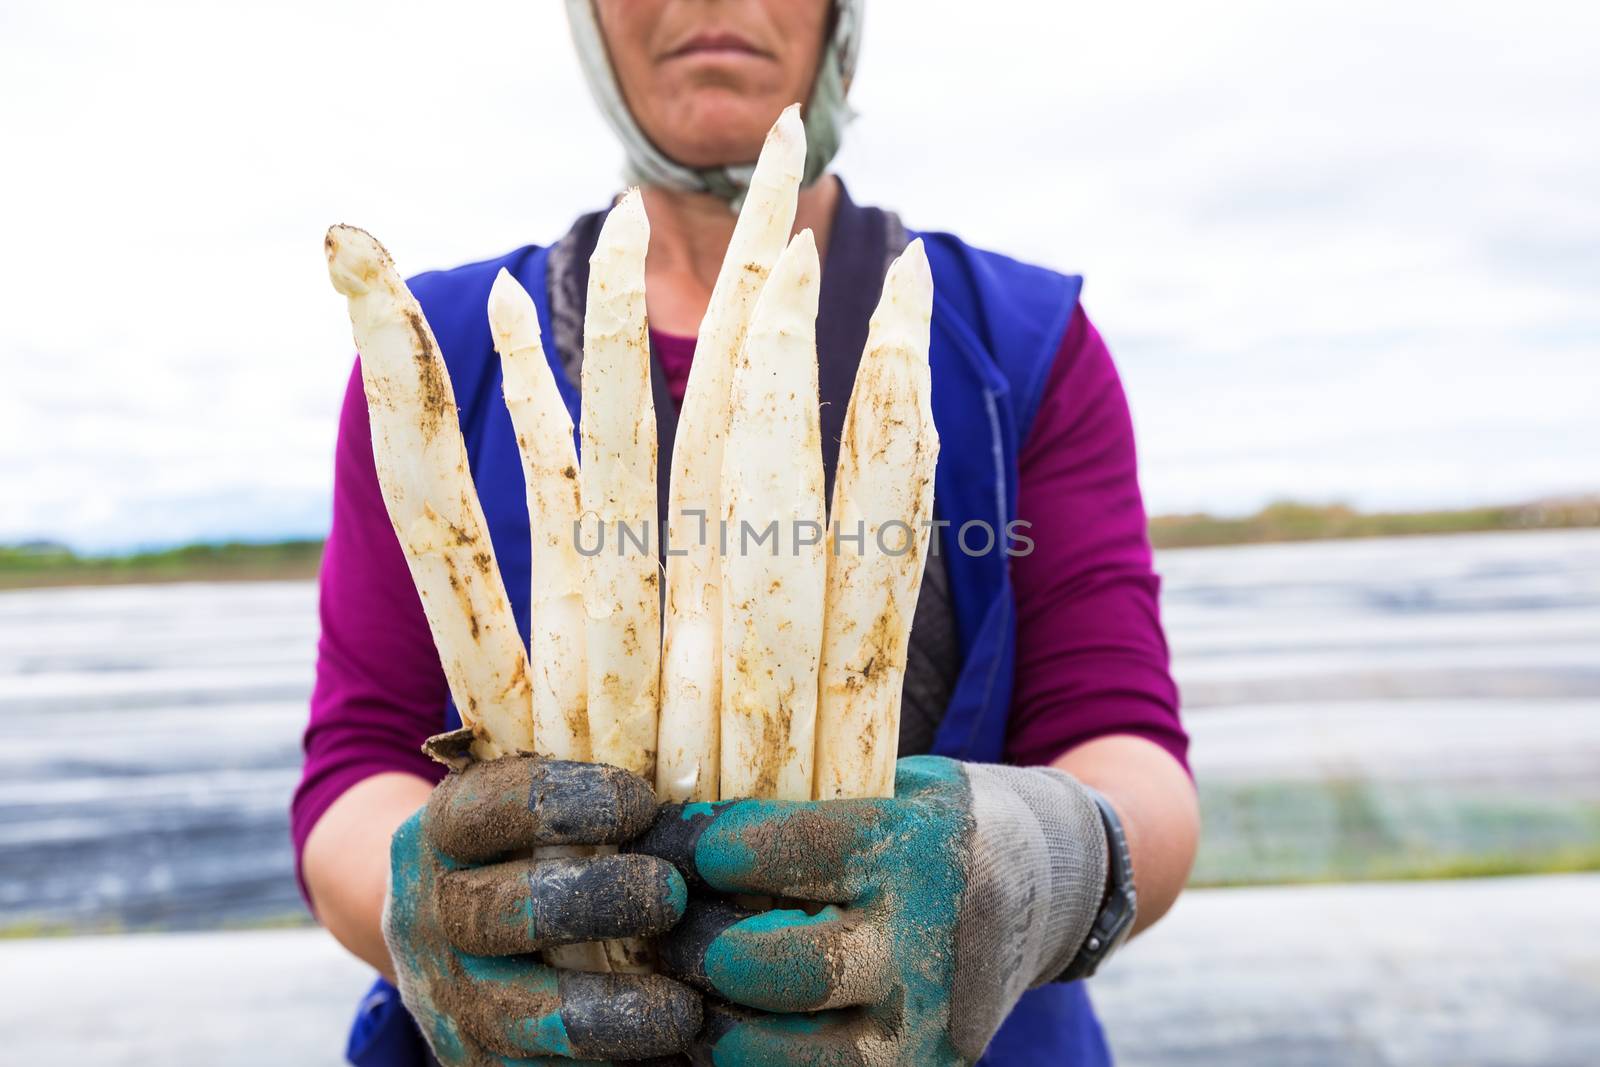 Xrisoupoli, Kavala, Greece - April 18, 2017: Immigrant seasonal farm workers (men and women) during harvesting white asparagus in the Xrisoupoli of Northern Greece.